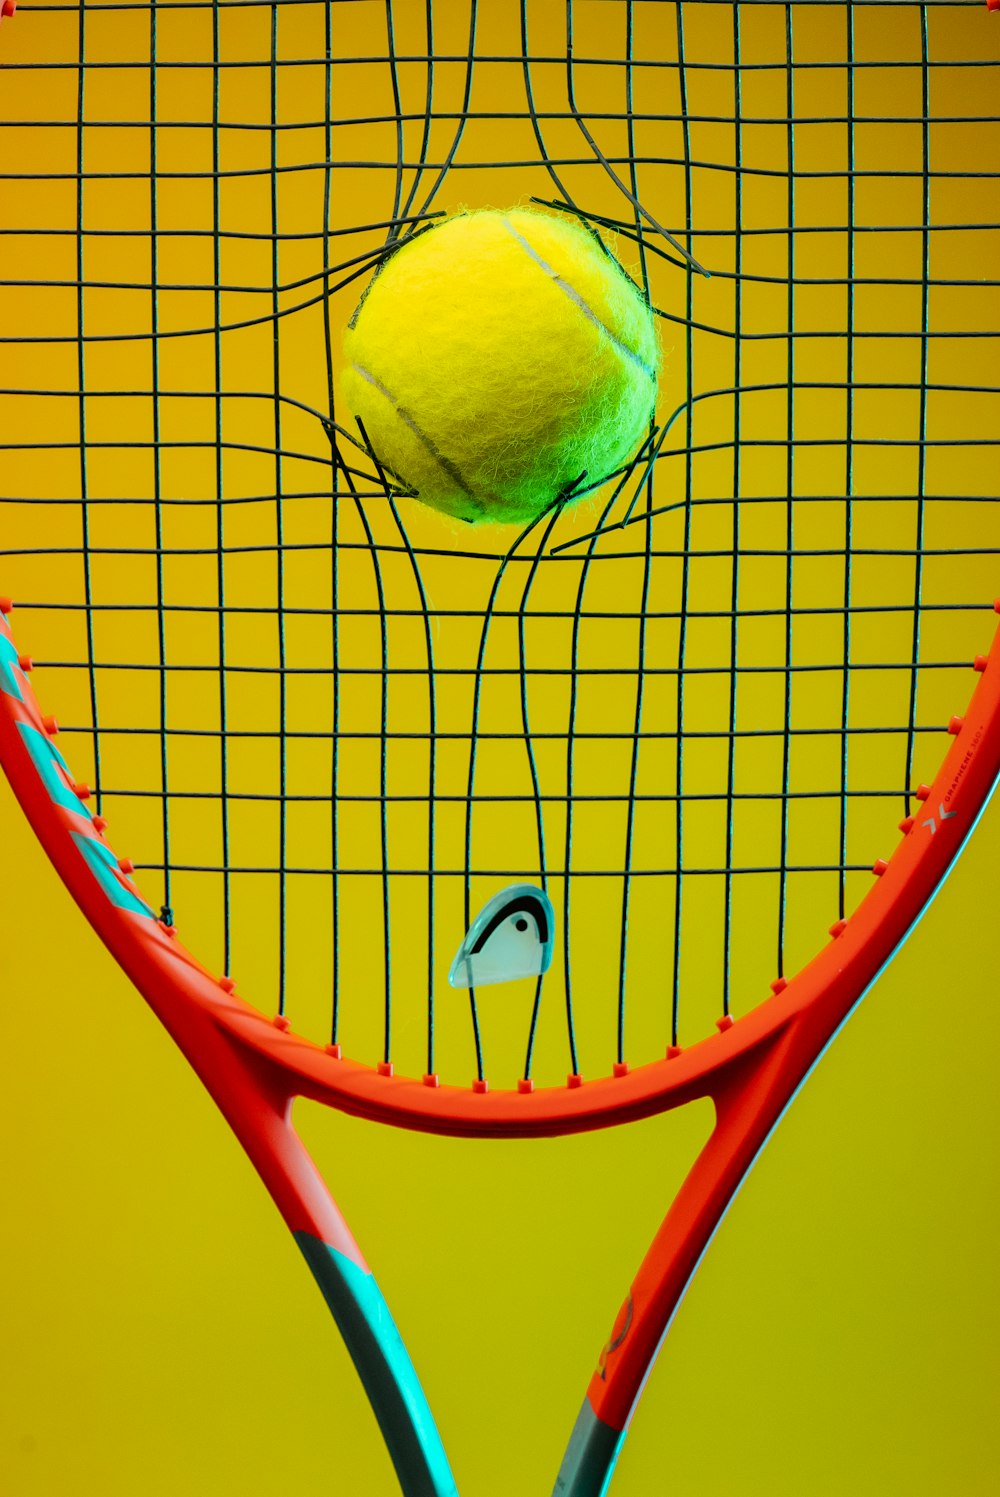 a tennis racket with a tennis ball on it